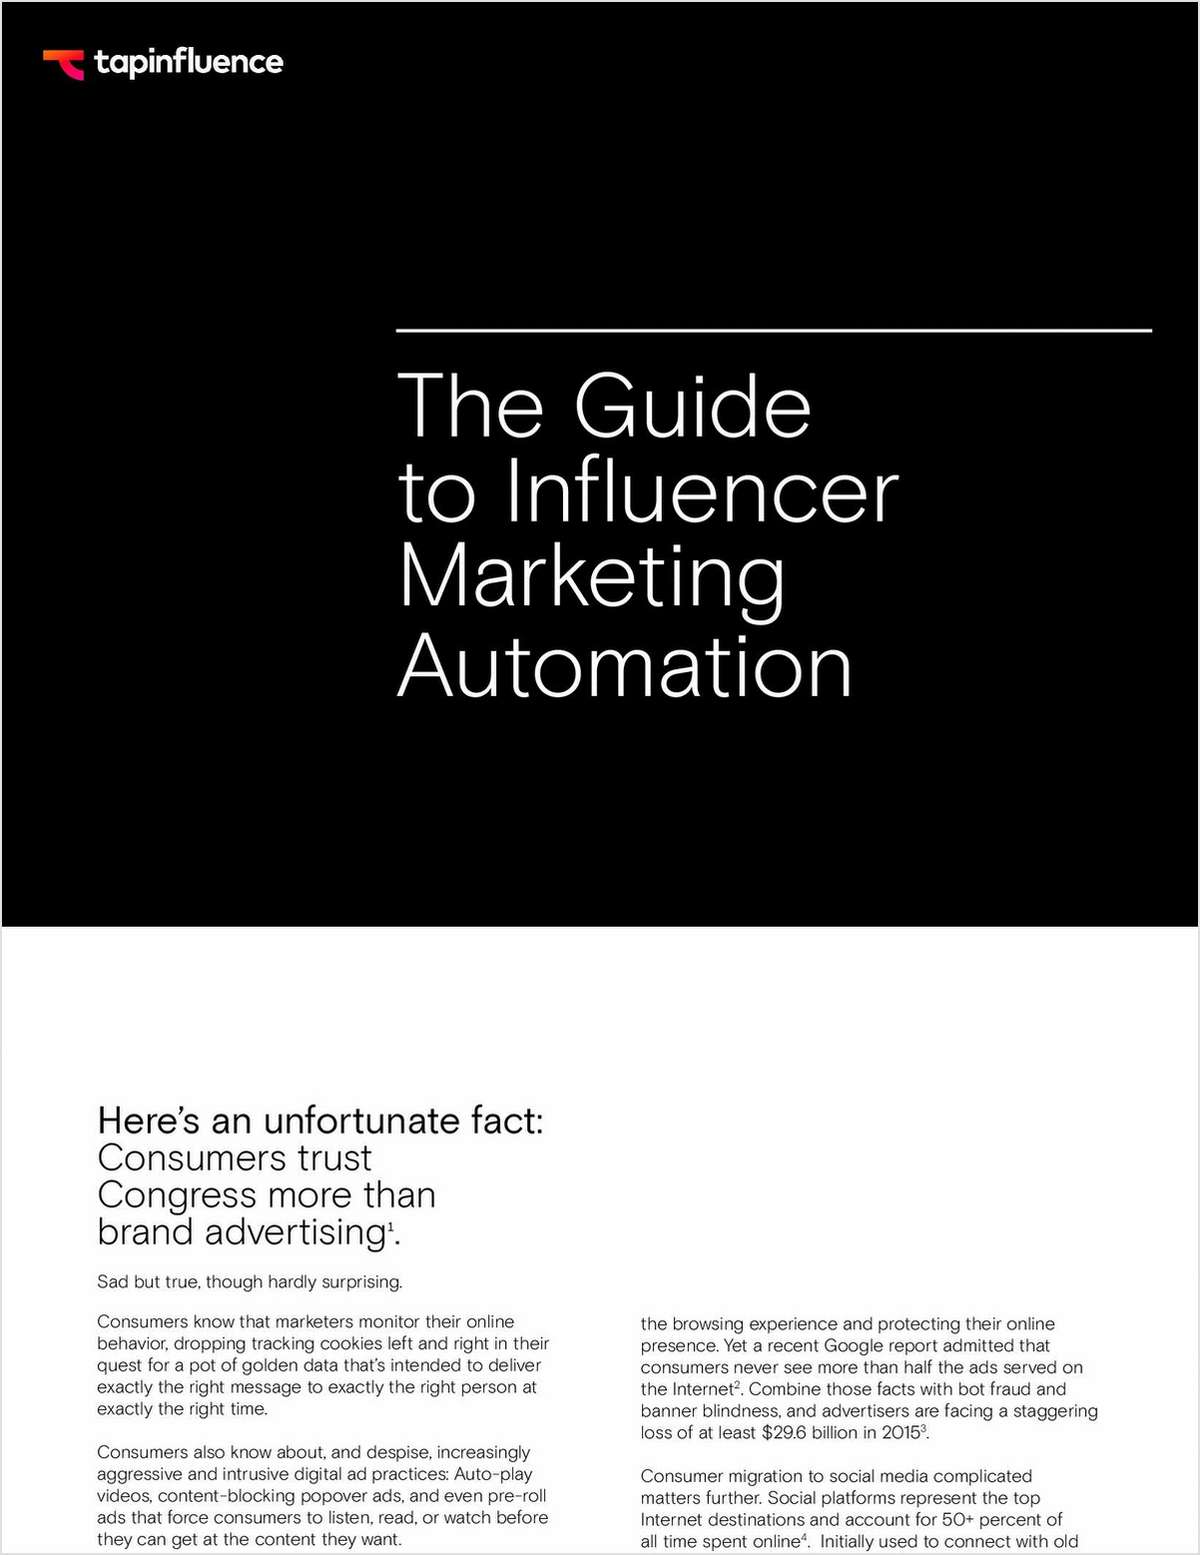 The Guide to Influencer Marketing Automation